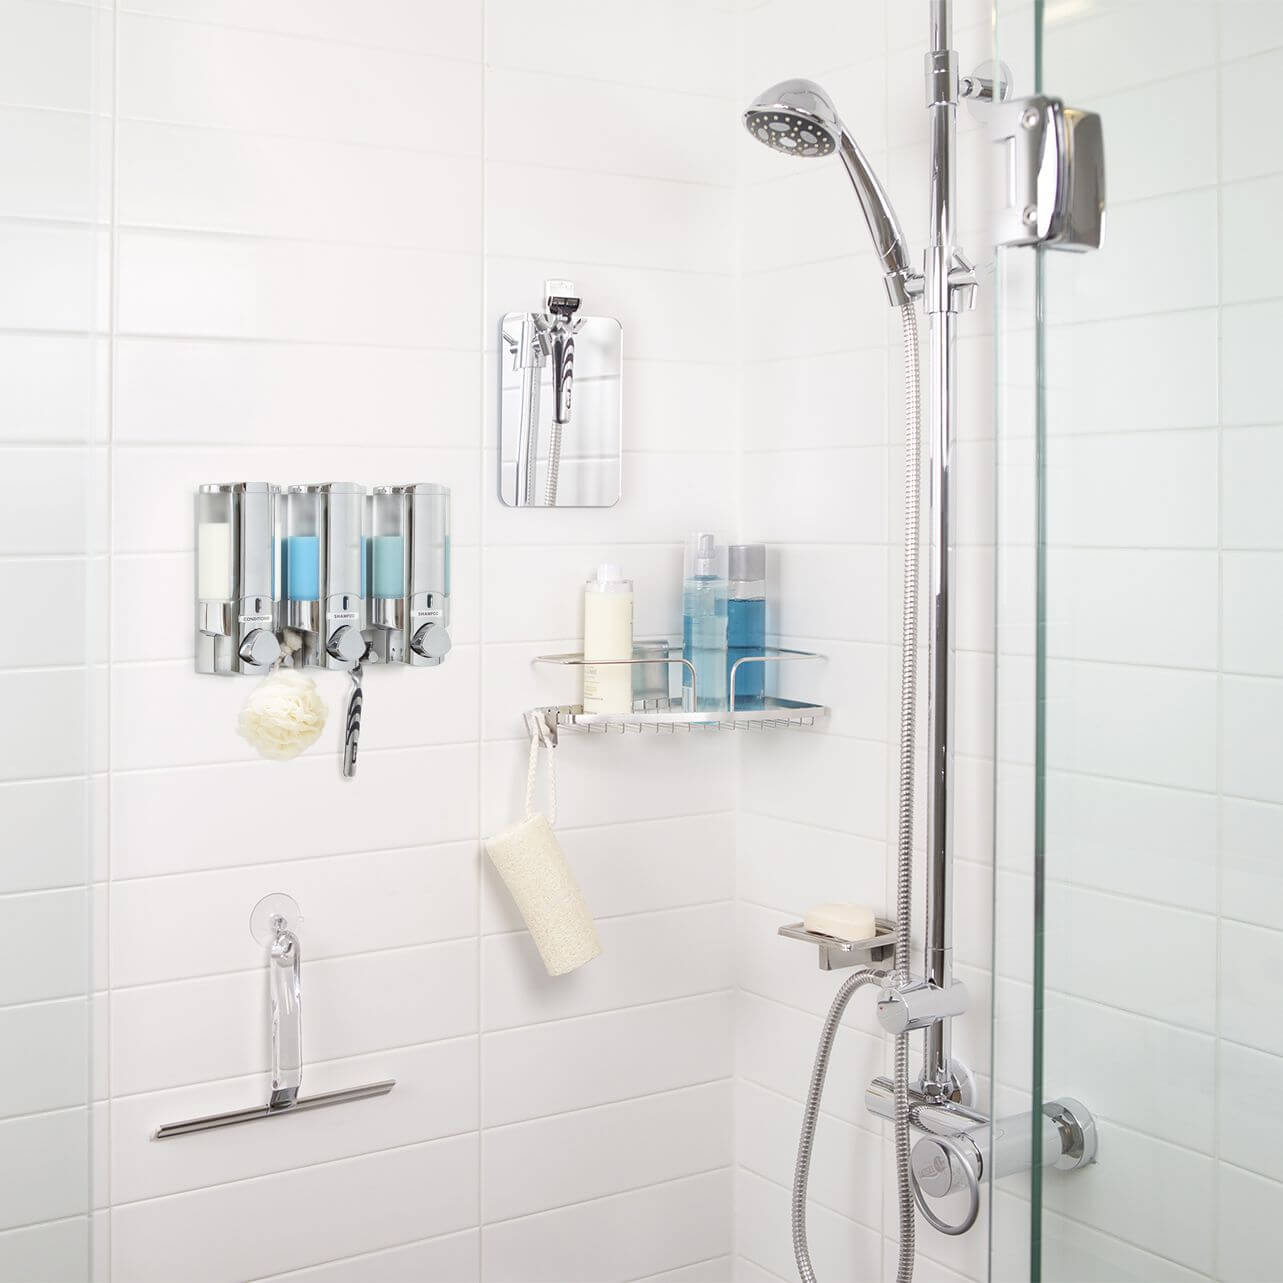 Silver suction products installed in a bathroom shower